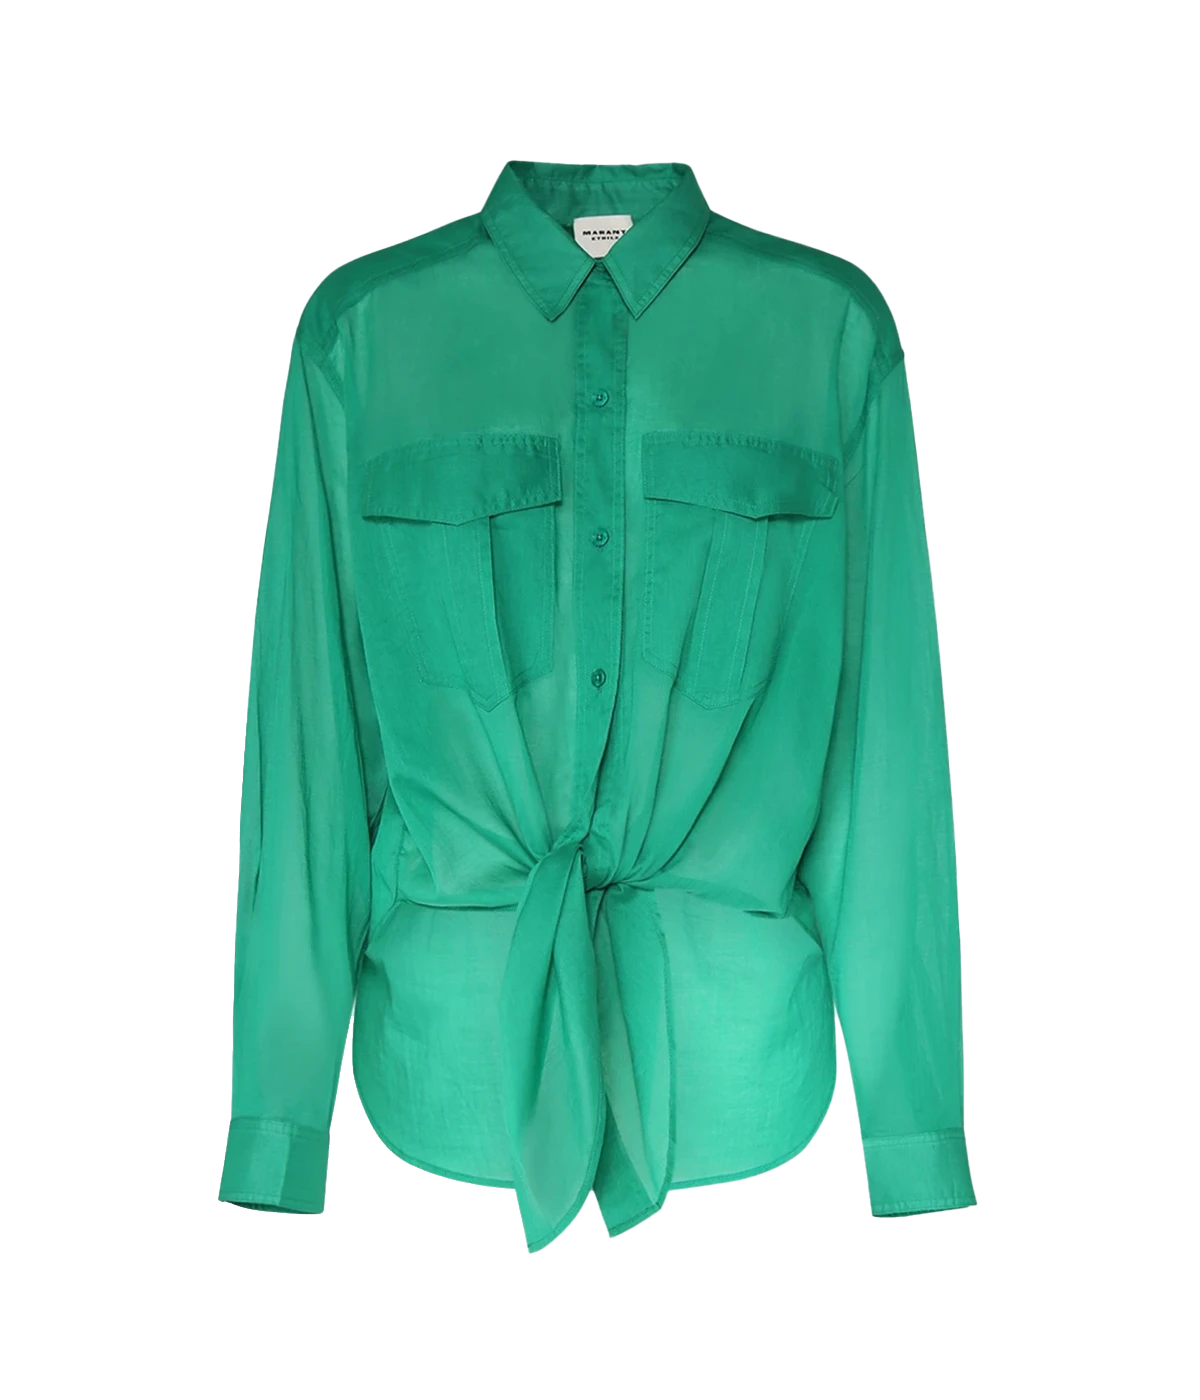 Long sleeve high low front button shirt by Isabel Marant. Wash and wear, bra friendly, versatile addition to your wardrobe. Vibrant emerald green cotton voile. 